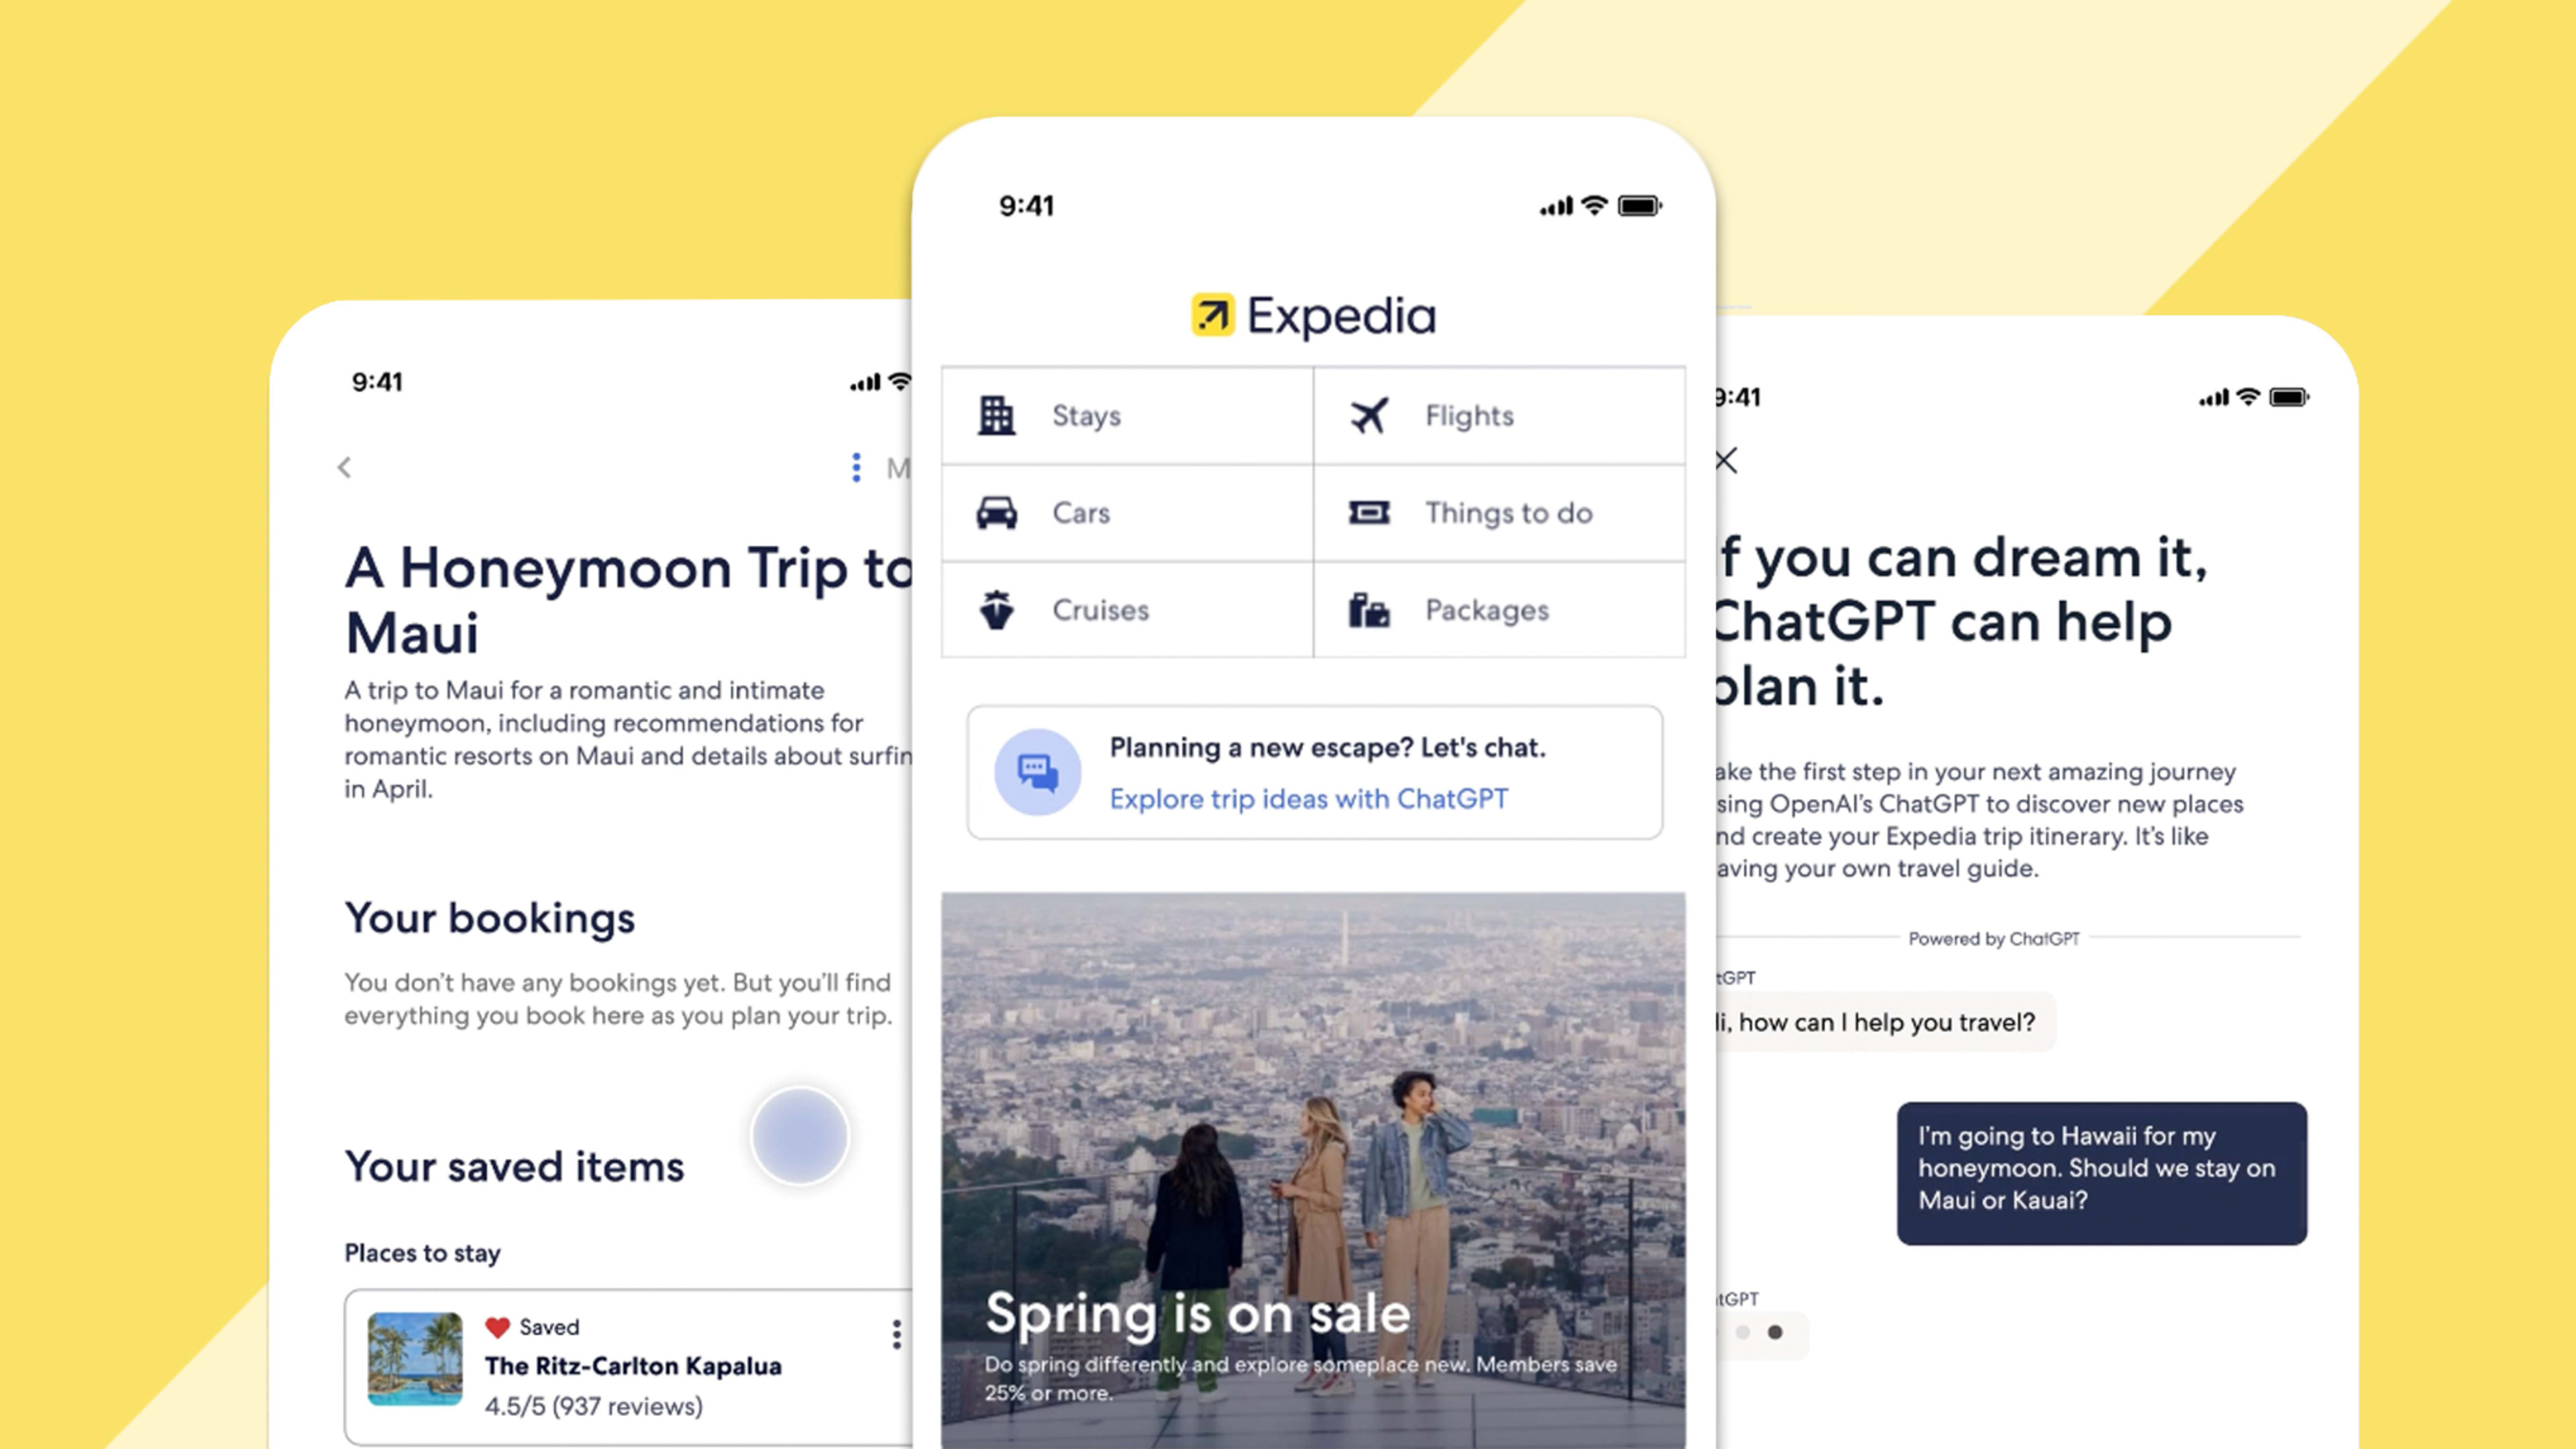 Expedia is integrating ChatGPT into its app to help users make travel plans